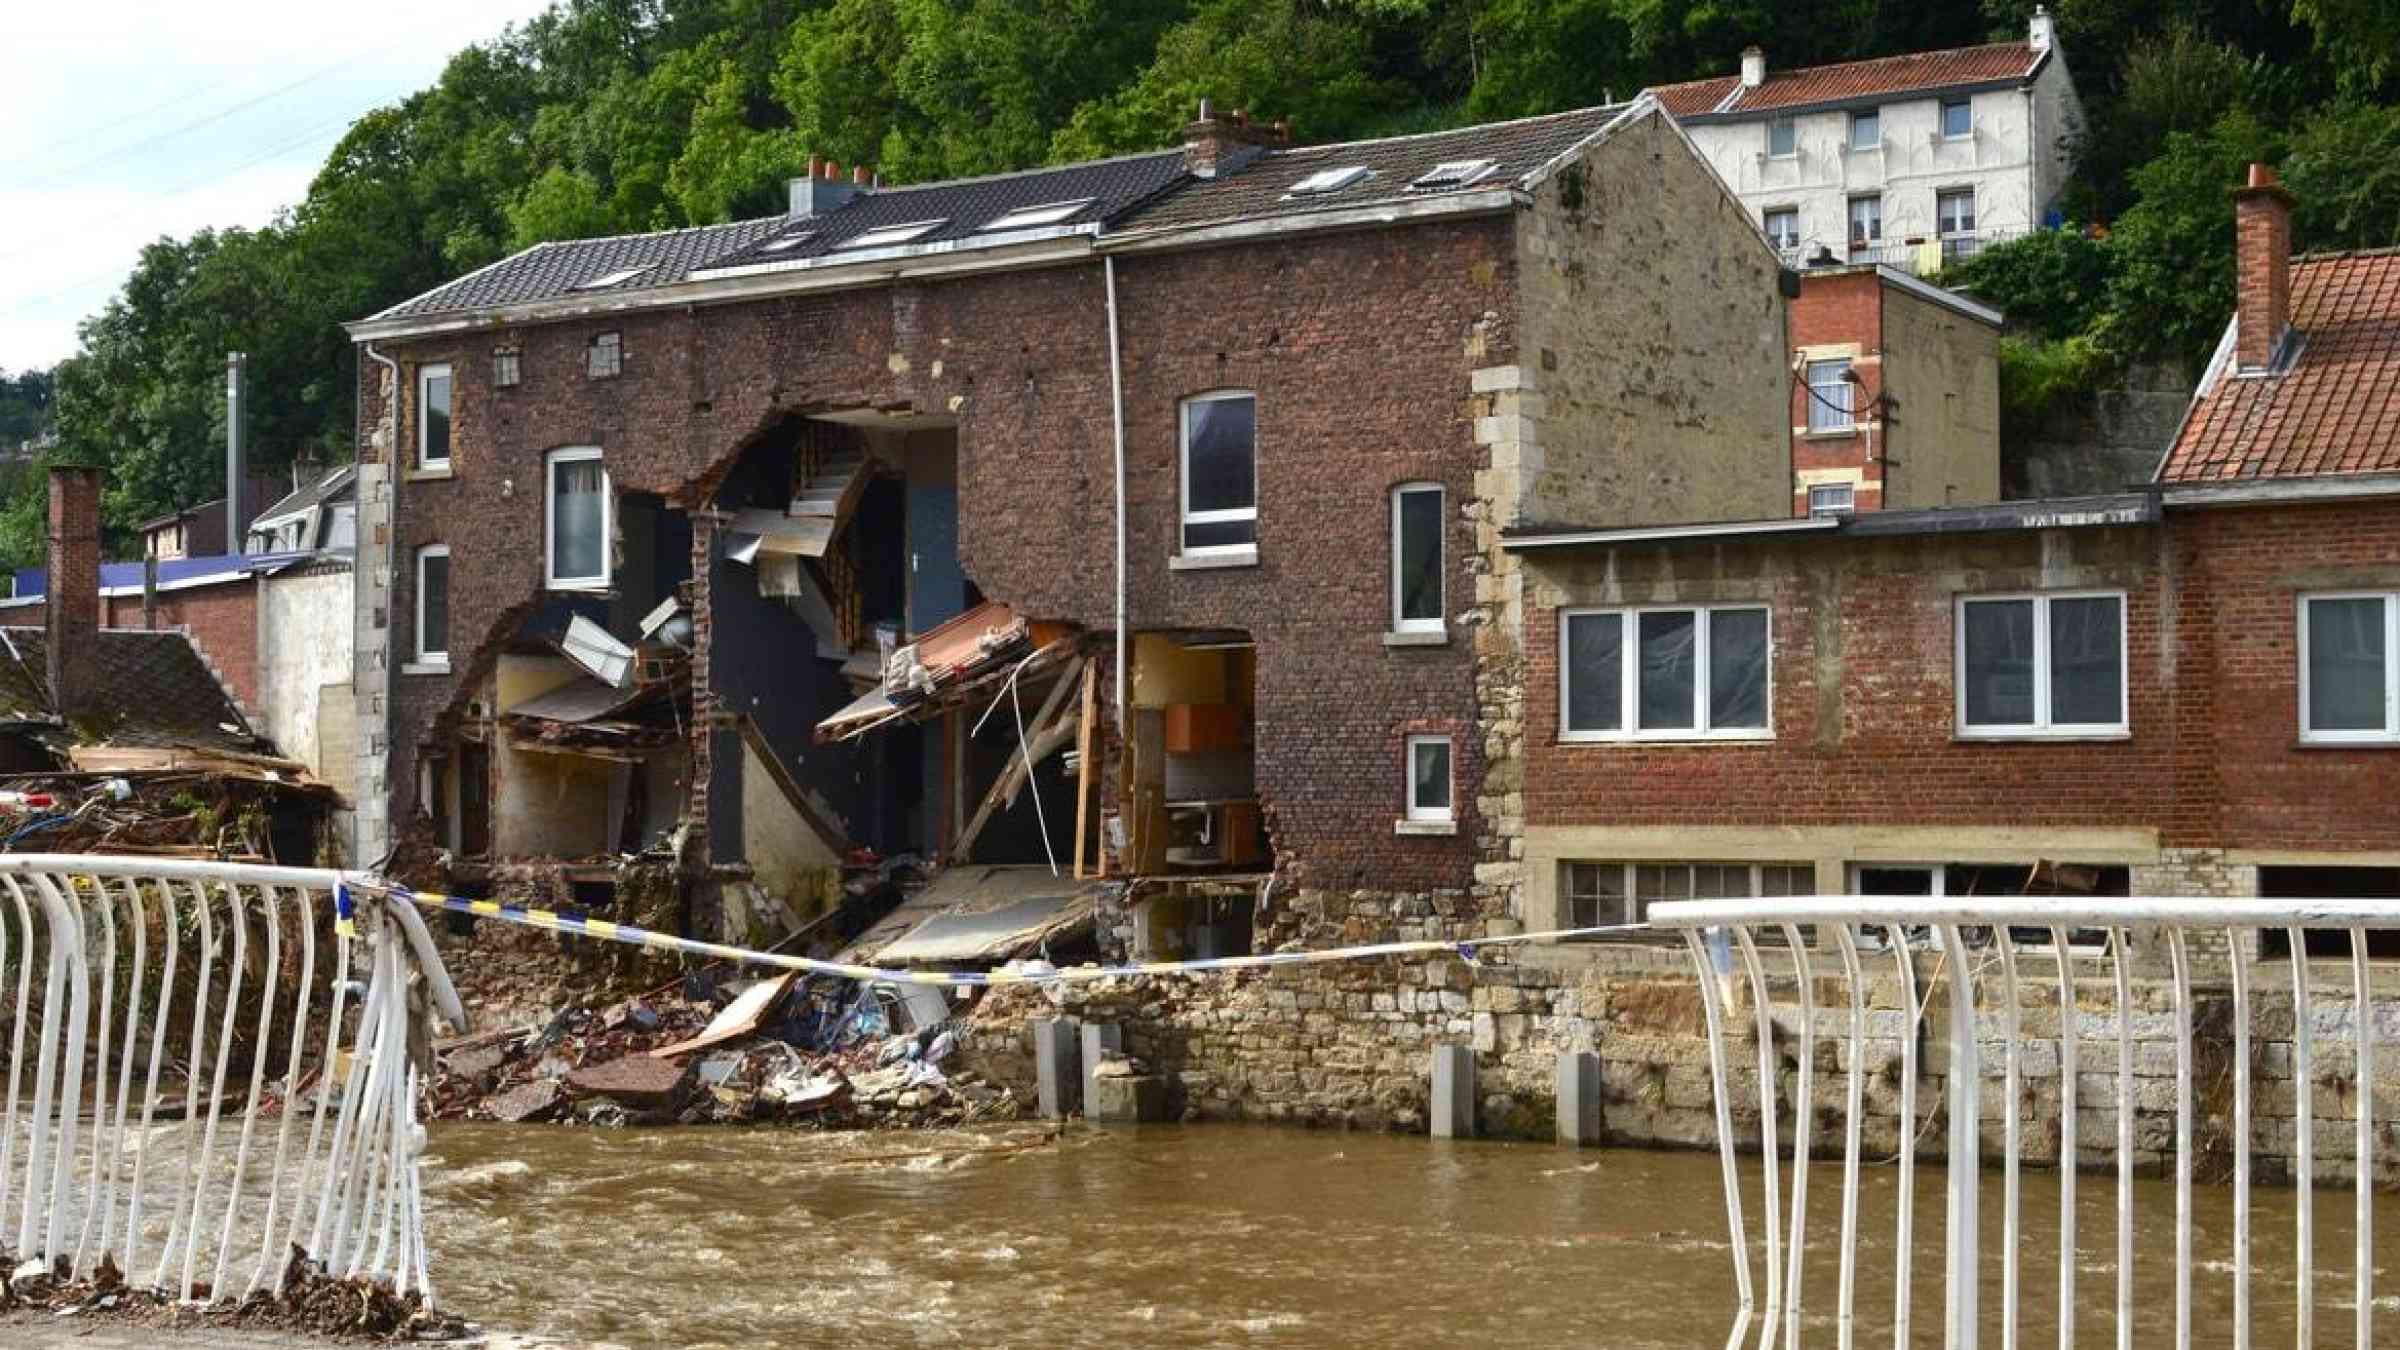 Destroyed house in Pepinster, Belgium after the July 2021 floods